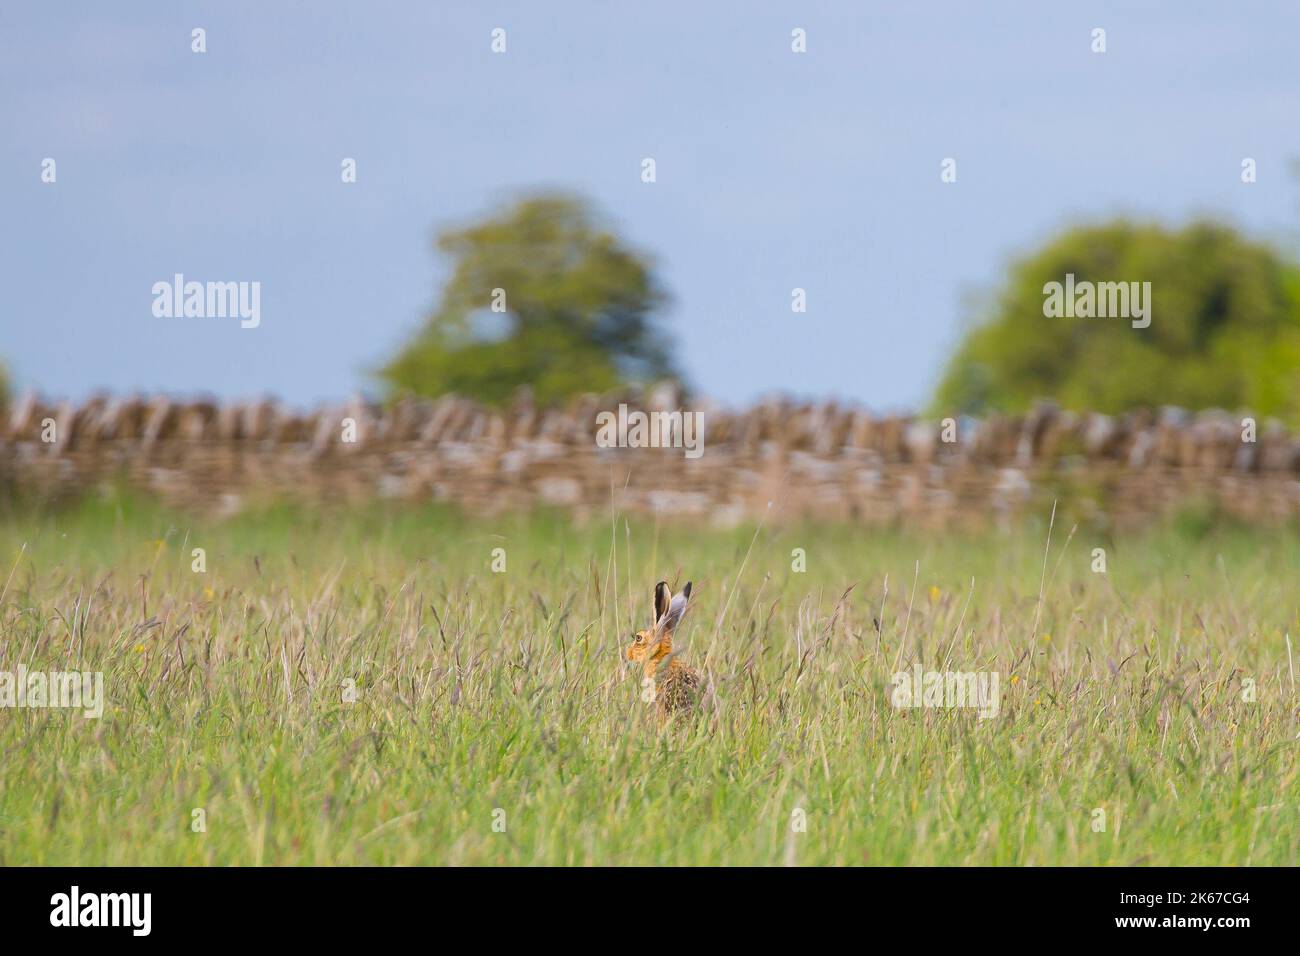 Wild, UK brown hare (Lepus europaeus) sitting isolated in a countryside field of long grass with a stone wall in the background. Stock Photo